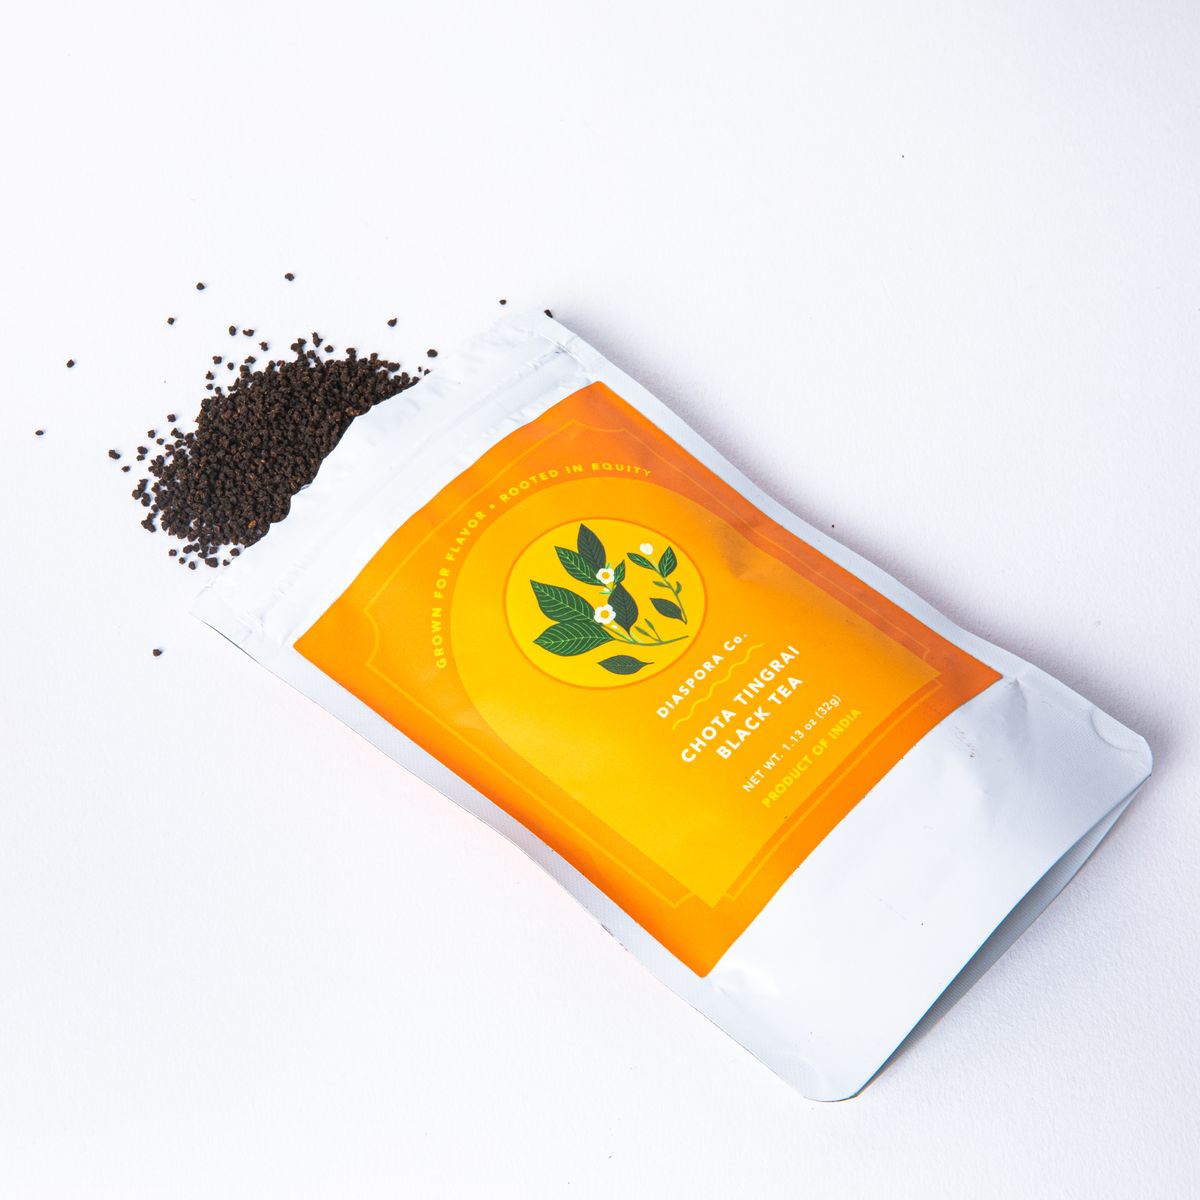 Ground black tea leaves spilled out of an open packaged white bag with an orange label with floral illustration and text that reads "Chota Tingrai Black Tea"